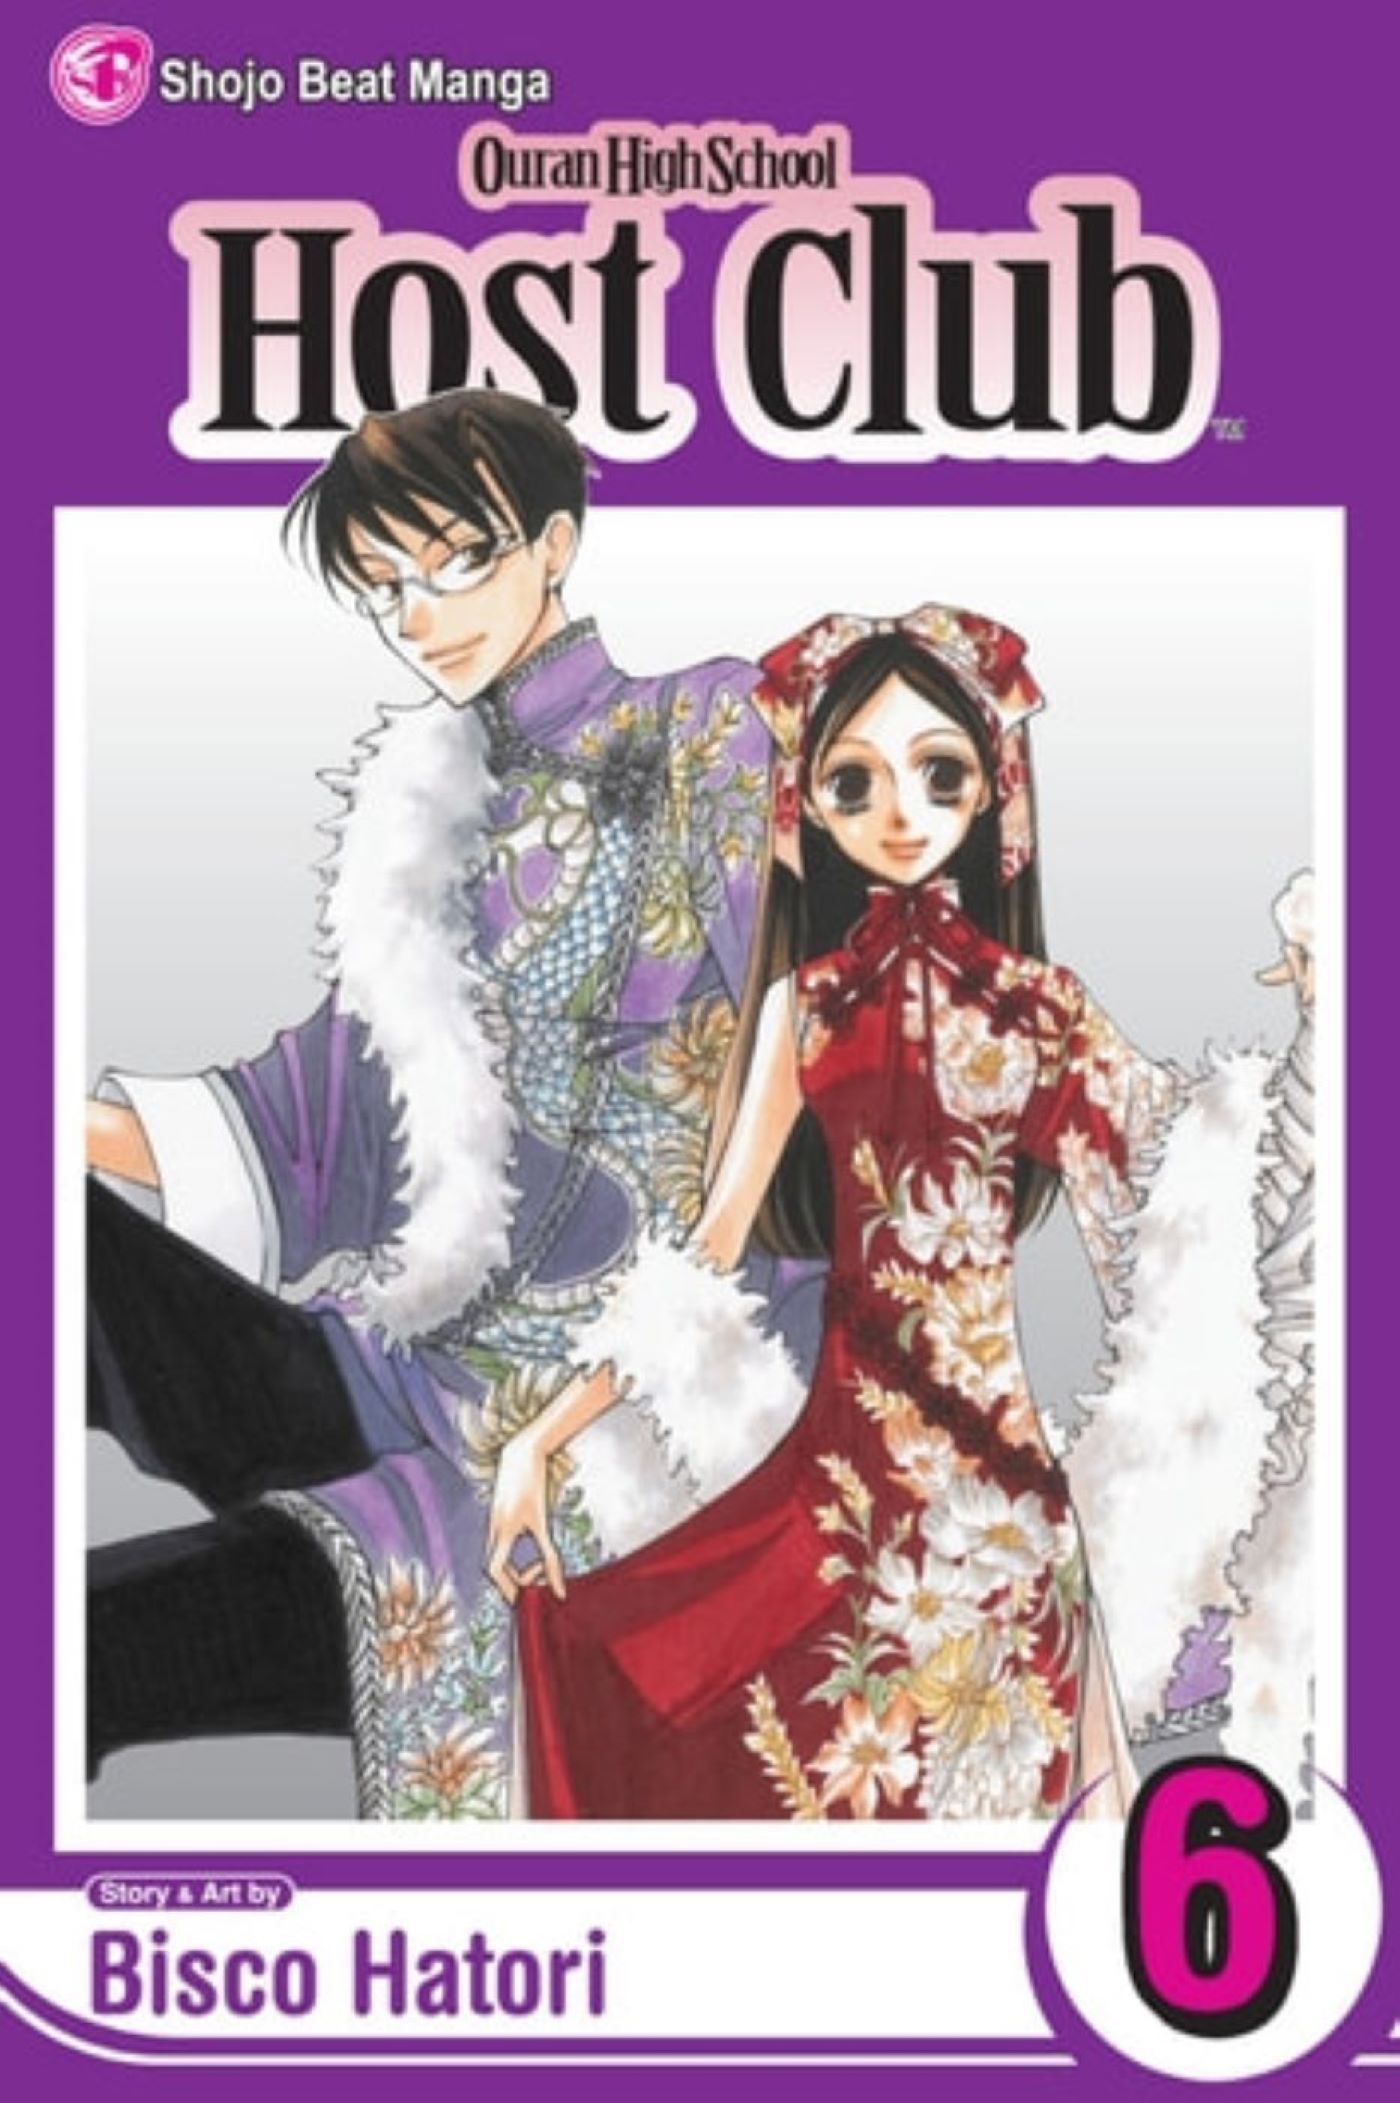 Ouran High School Host Club - Volume 6 - Kyoya and Haruhi in Chinese traditional clothing-1